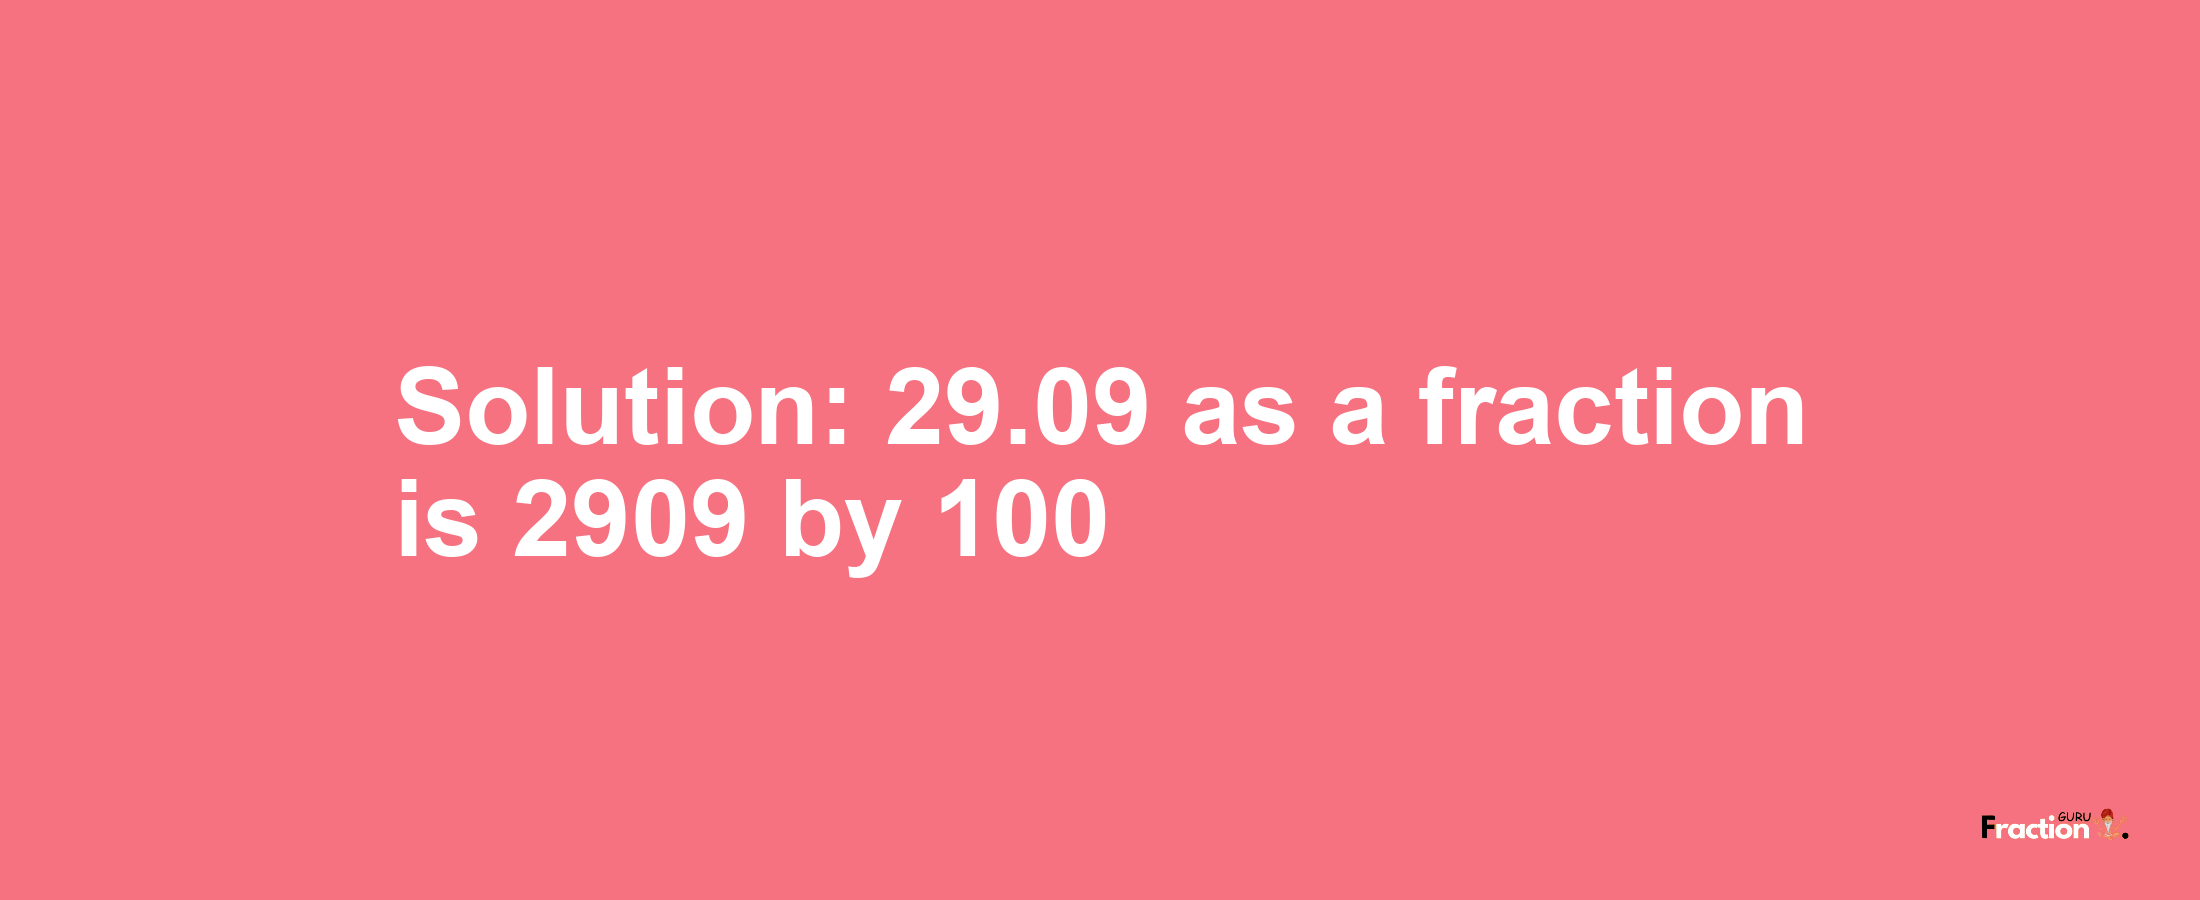 Solution:29.09 as a fraction is 2909/100